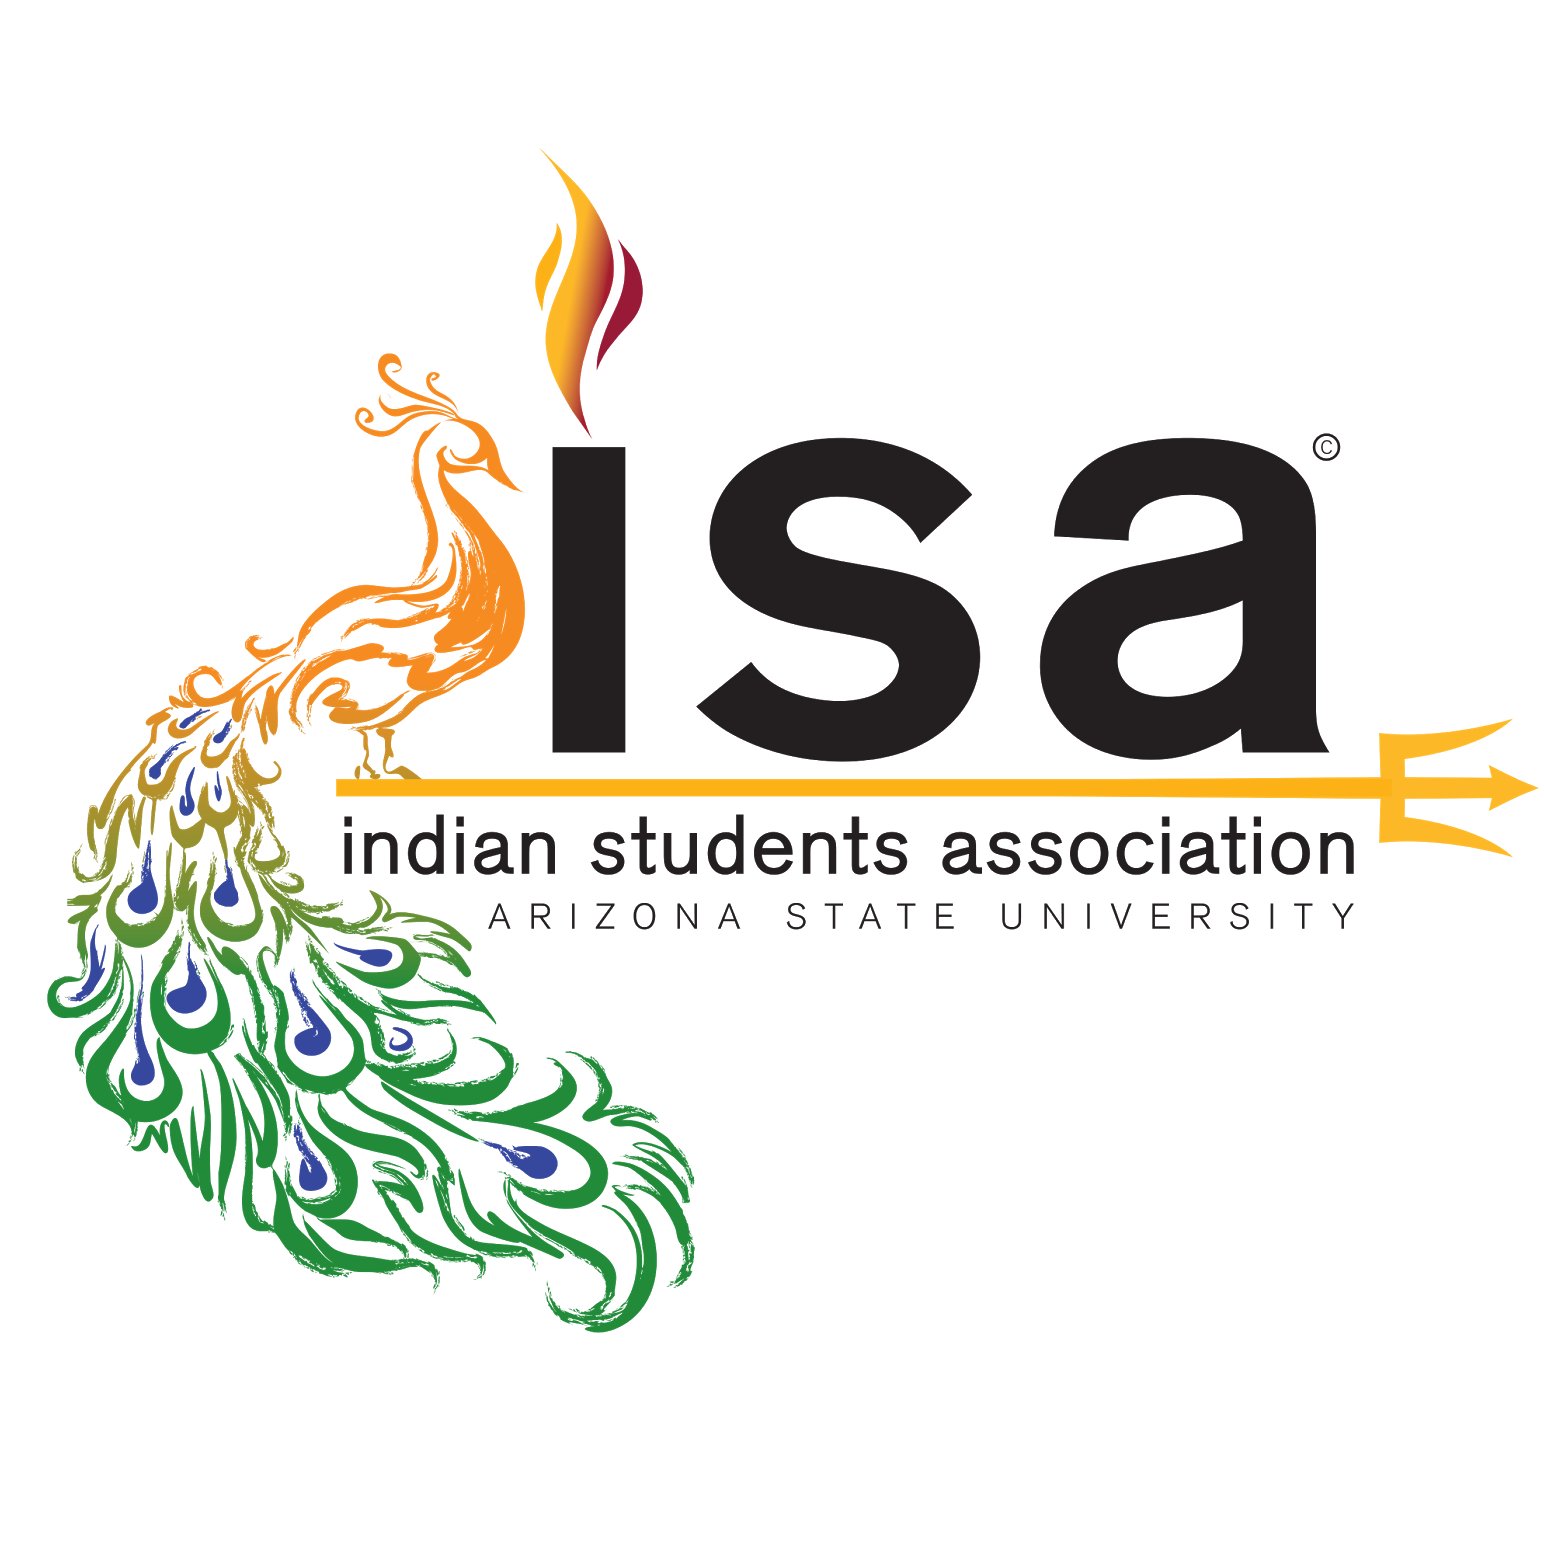 The Indian Students Association - ASU (ISA) is an organization established by the Indian students to promote Indian Culture at Arizona State University.